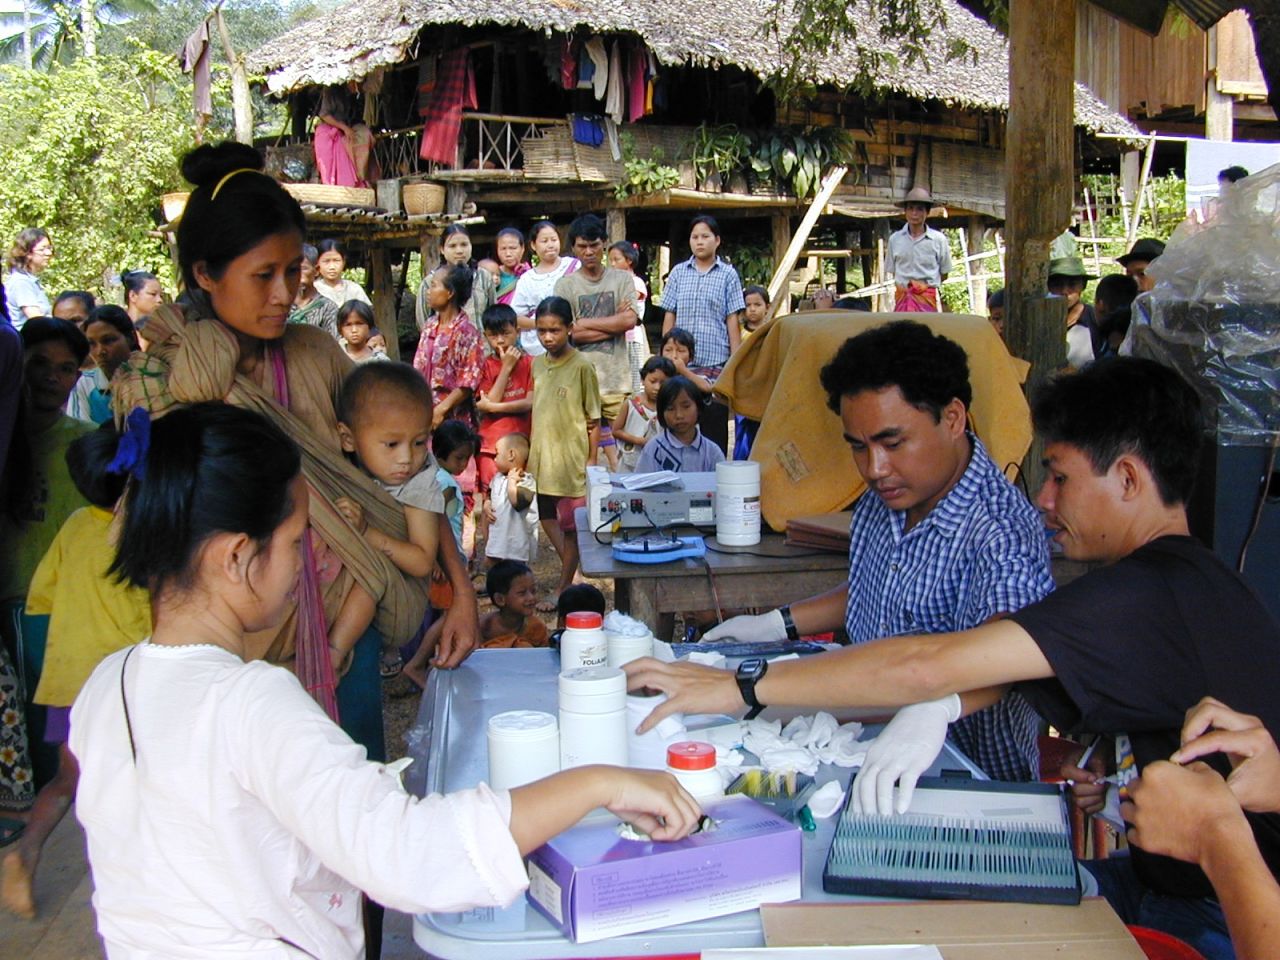 Shoklo Malaria Research Unit is on the frontline of the battle against malaria in Southeast Asia. It was established in 1986 in the Shoklo refugee camp on the Thai-Burma border. 